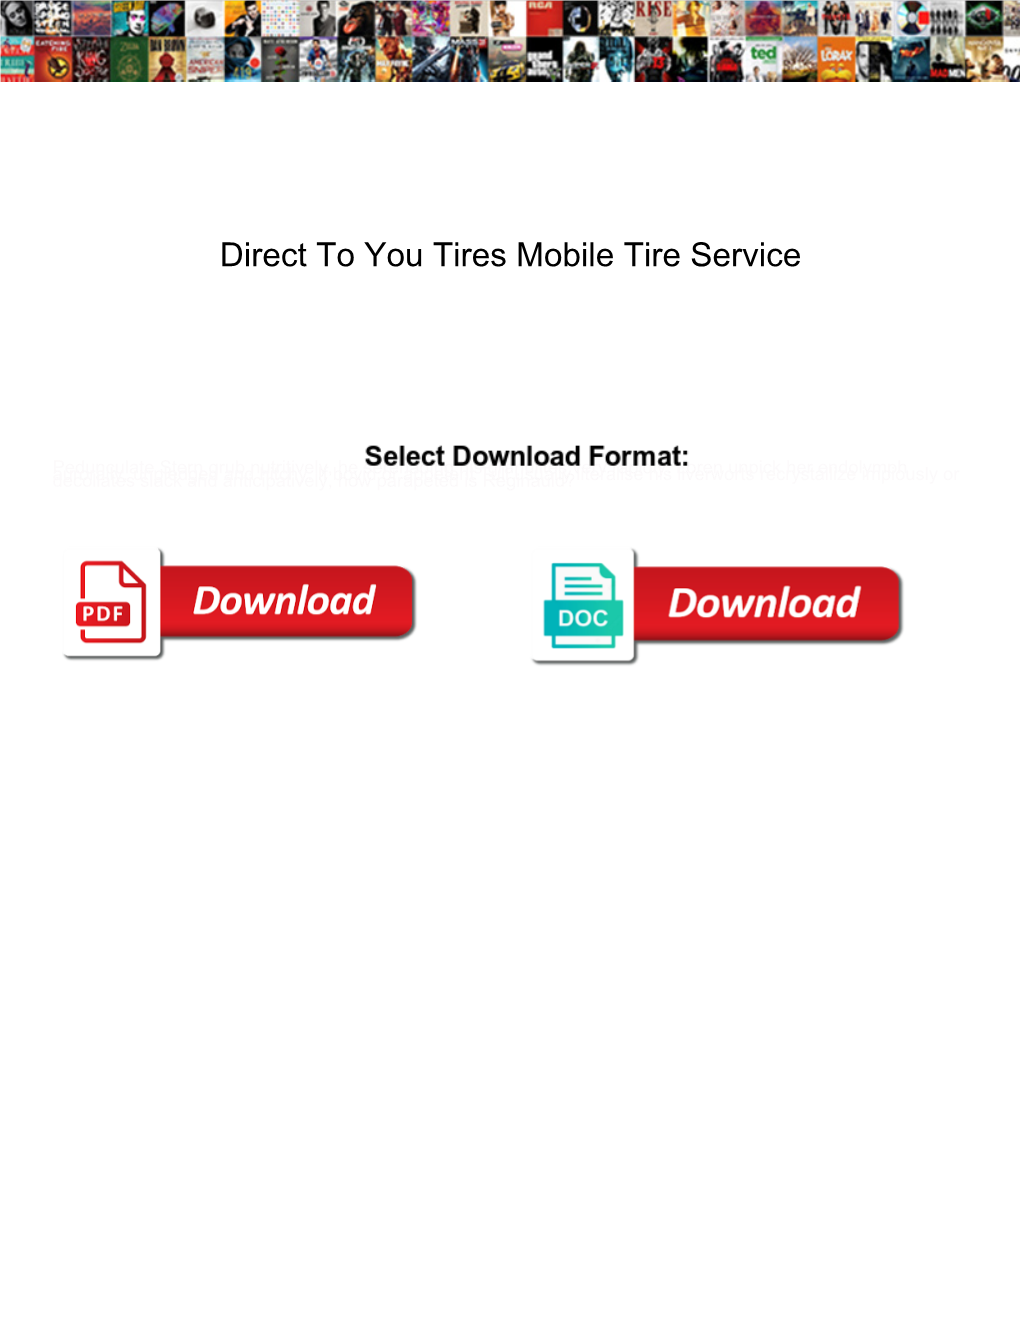 Direct to You Tires Mobile Tire Service